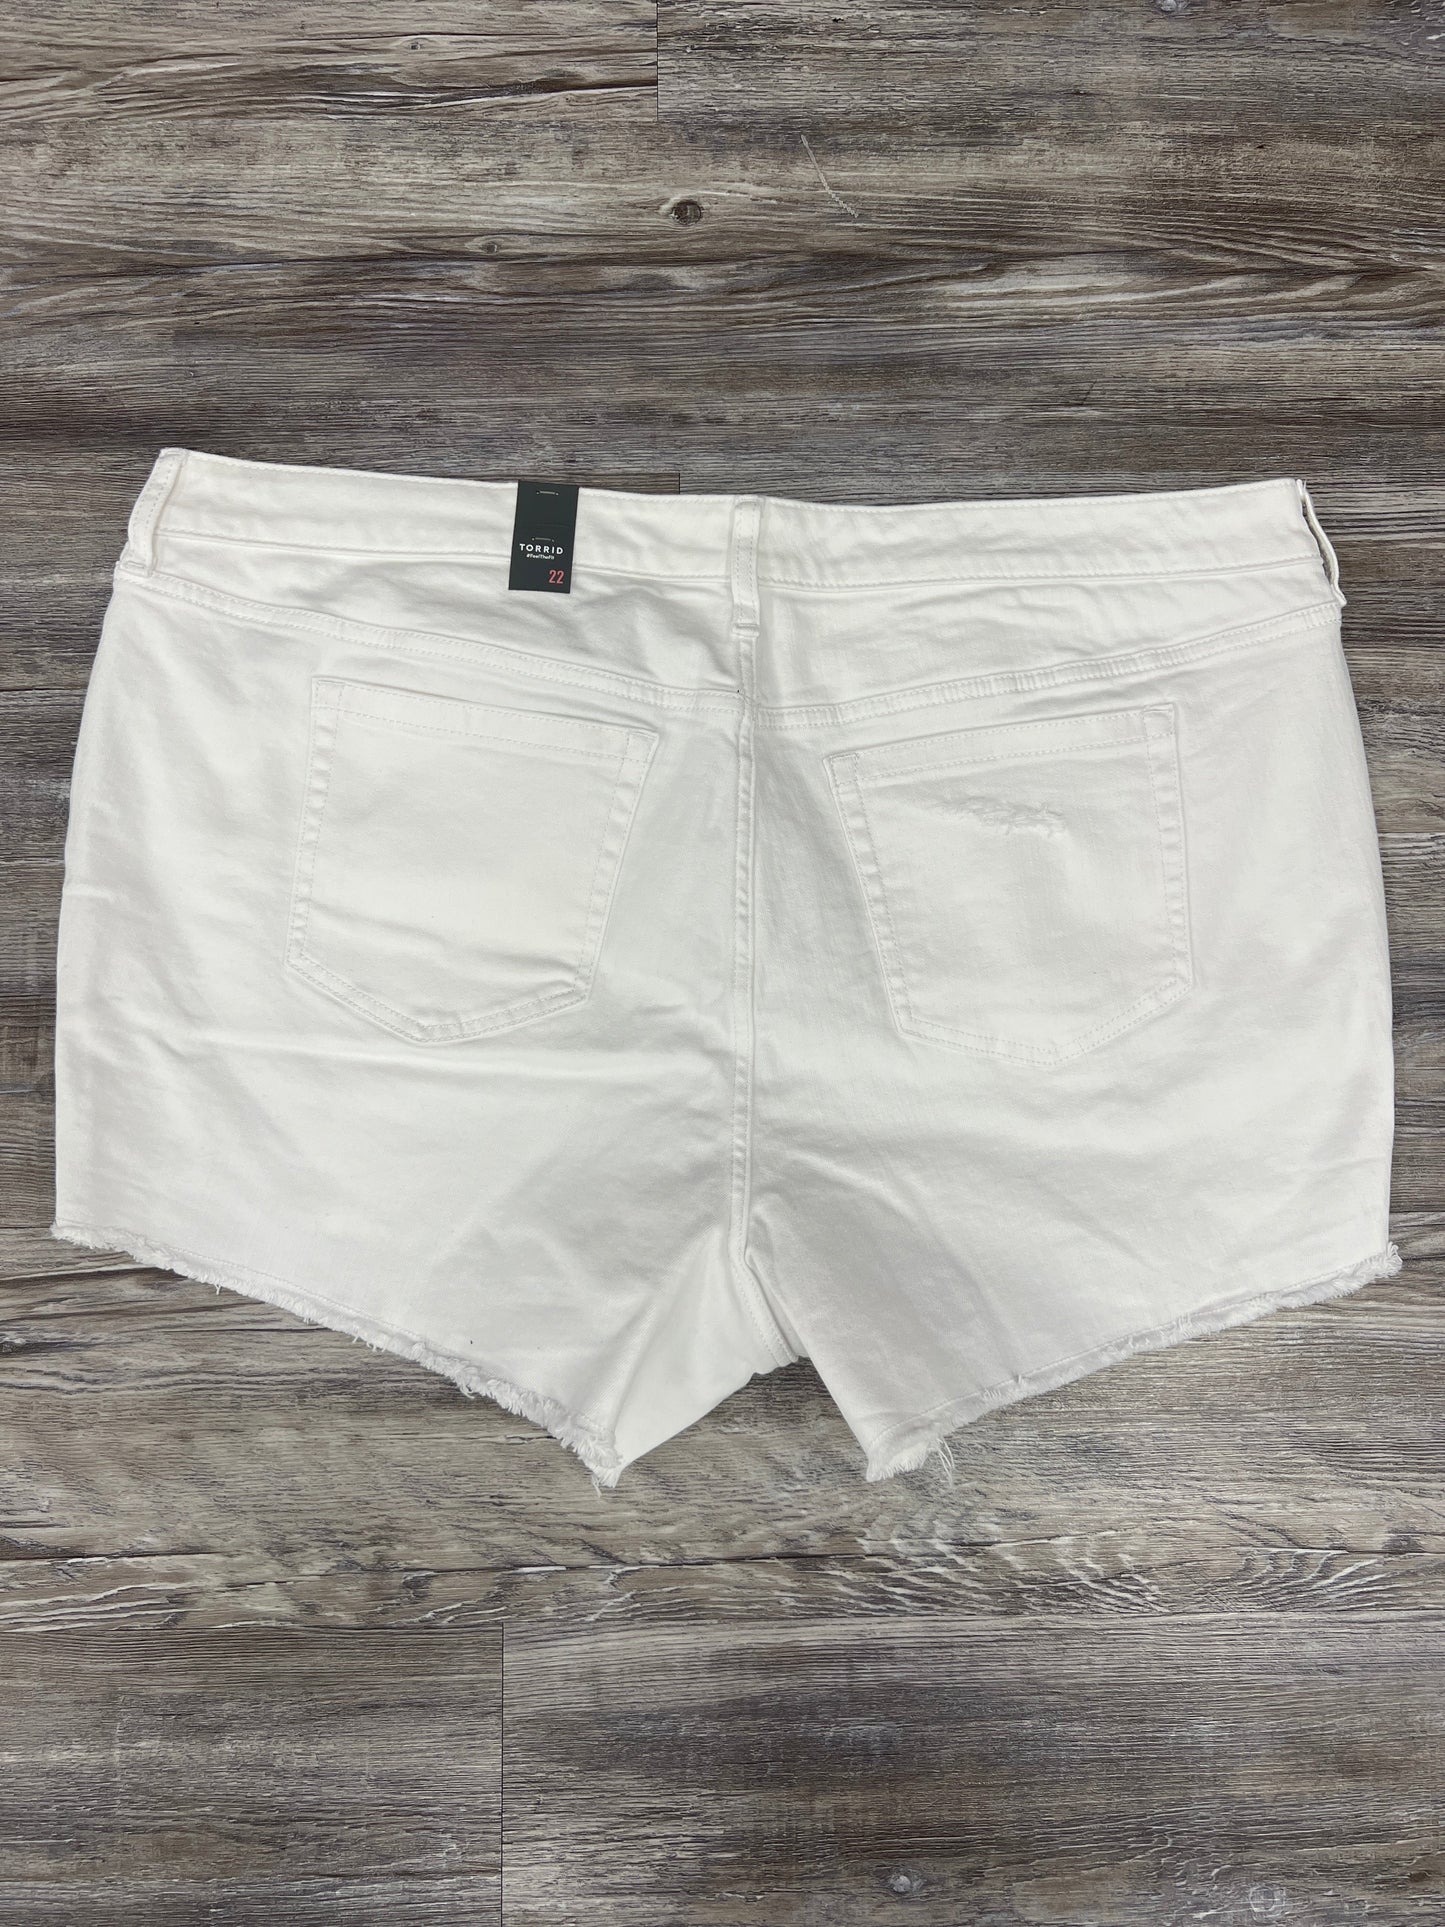 Shorts By Torrid Size: 22